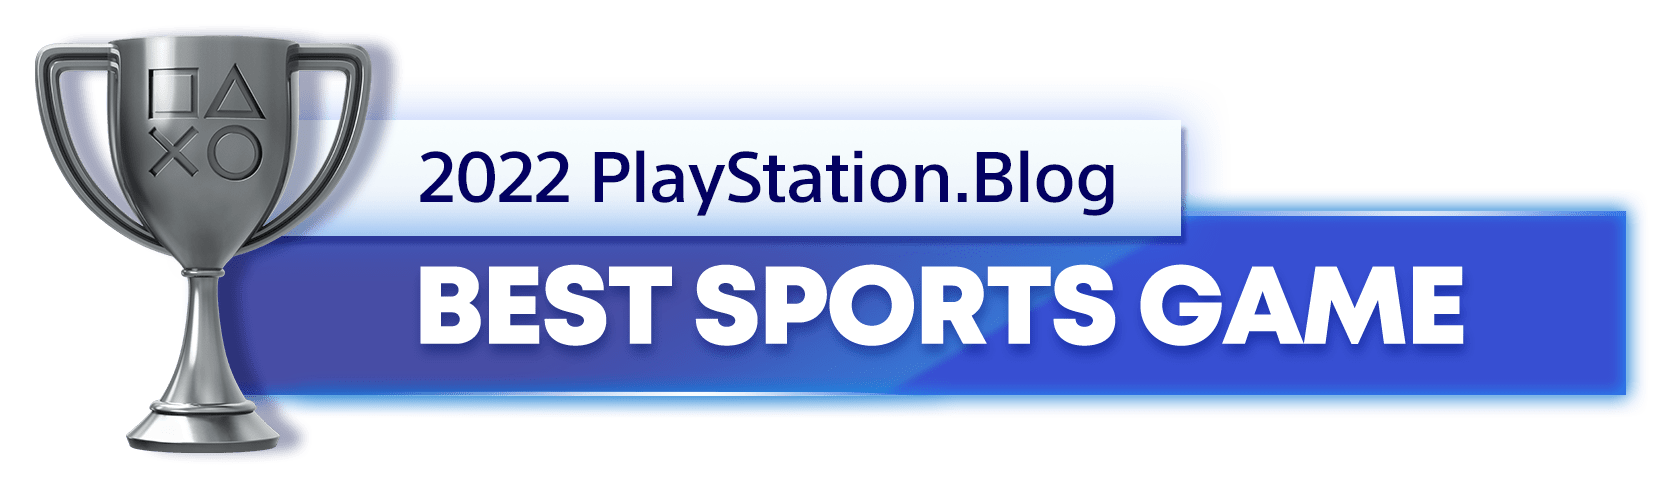 PlayStation Blog's 2022 Silver trophy for best sports game